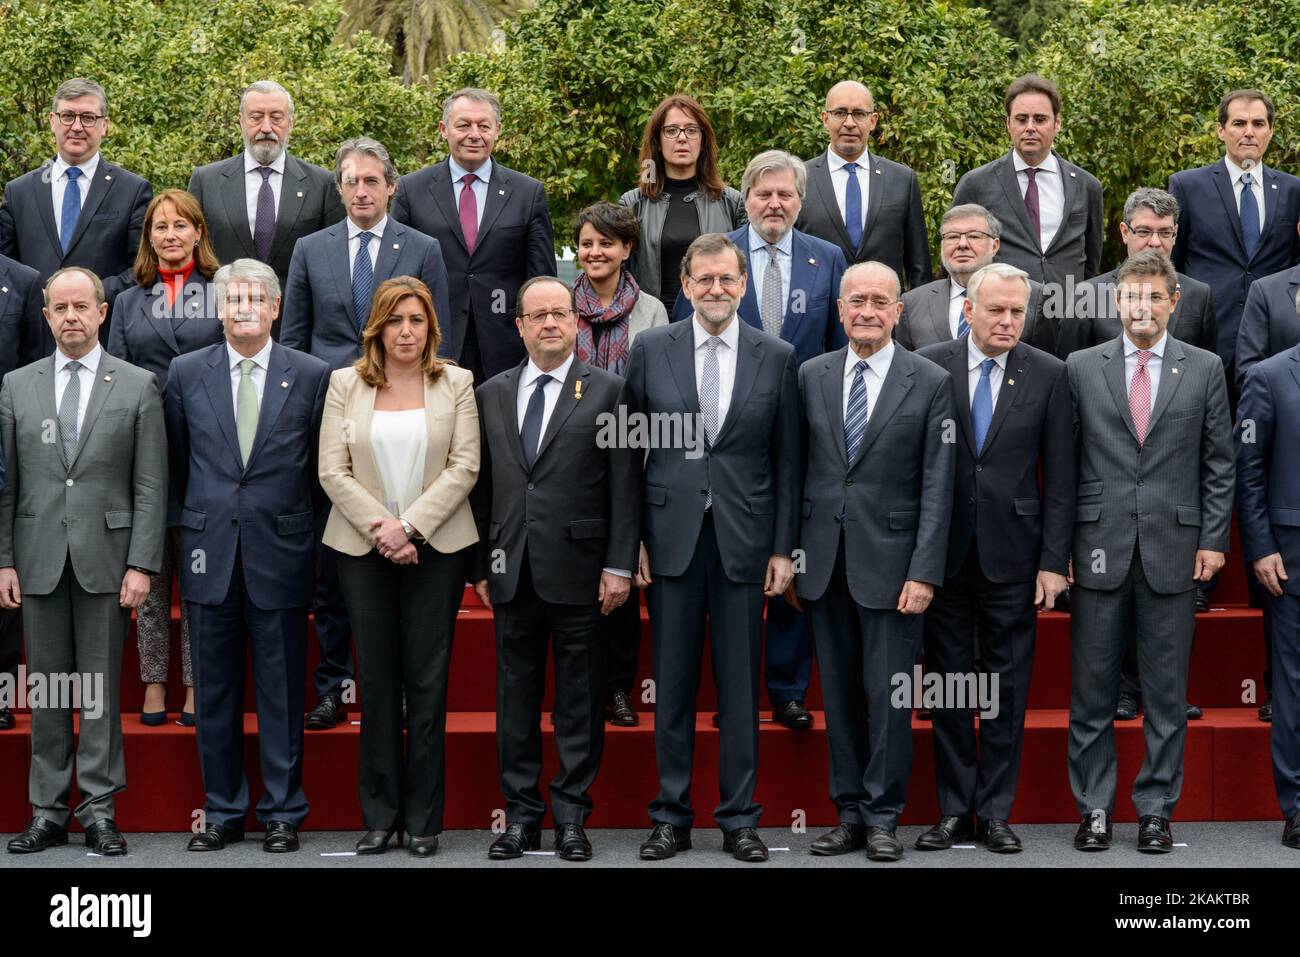 (Front row) Spanish Prime Minister Mariano Rajoy (4R) and President of the French Republic Francois Hollande (4L) pose for a family photo flanked by President of Andalusian regional government Susana Diaz (3L), Mayor of Malaga Francisco de la Torre (3R), French Justice Minister Jean-Jacques Urvoas (L), Spanish Minister of Foreign Affairs Alfonso Maria Dastis (2L), French Foreign Minister Jean-Marc Ayrault (2R), Spanish Minister of Justice Rafael Catala (R), (middle row) Spanish Minister of Economic Affairs and Competitiveness Luis de Guindos (L), French Minister for Ecology, Sustainable Develo Stock Photo